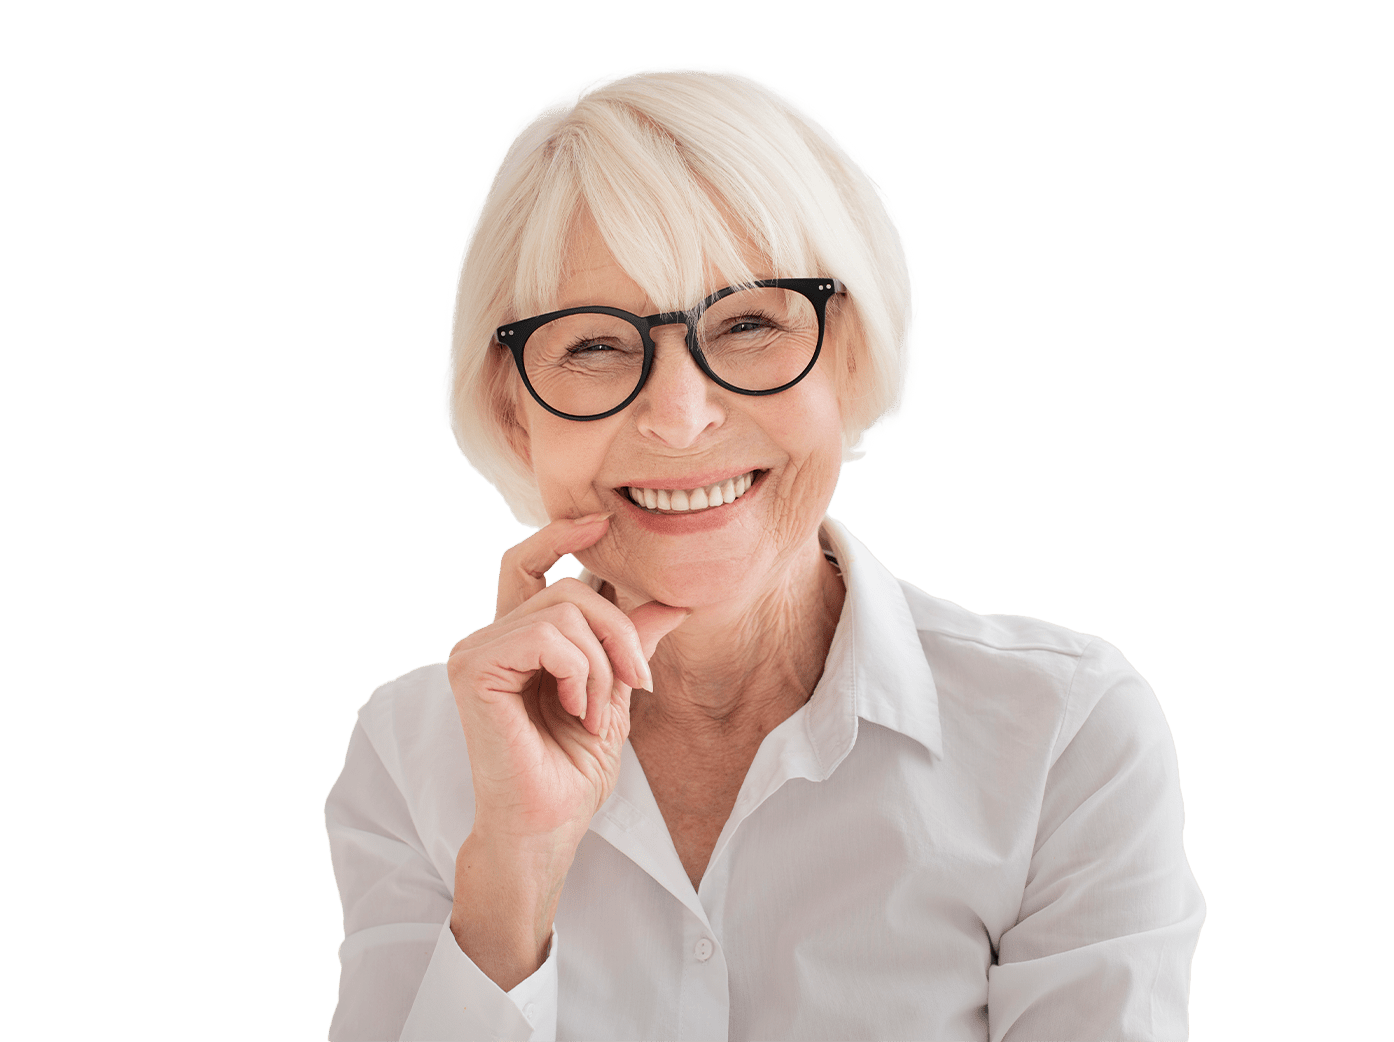 Older woman with grey hair wearing glasses in white button up shirt